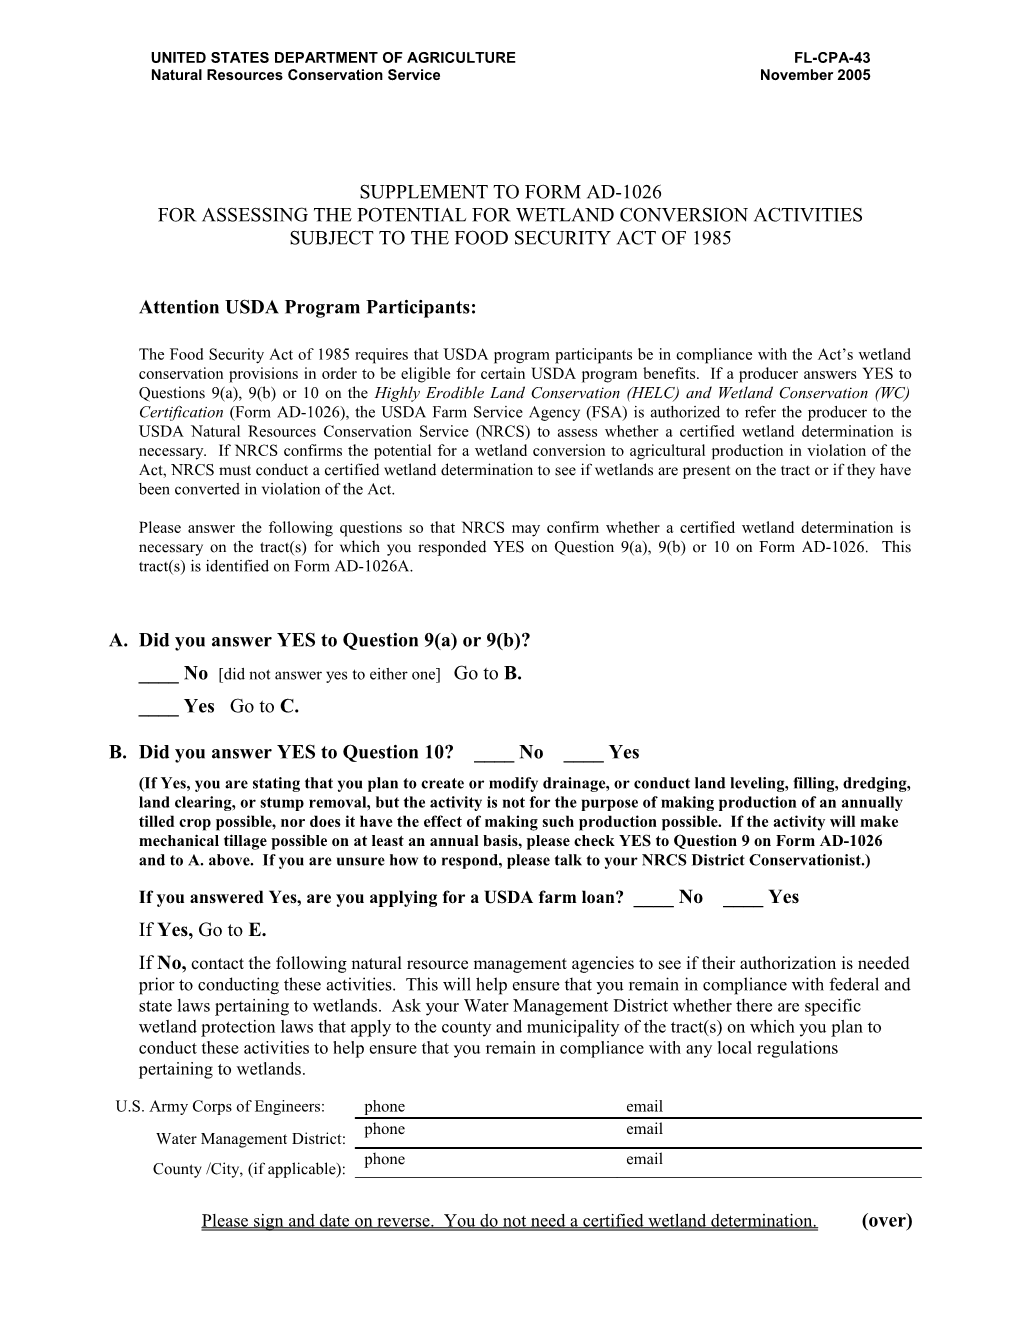 Supplement to Form Ad-1026